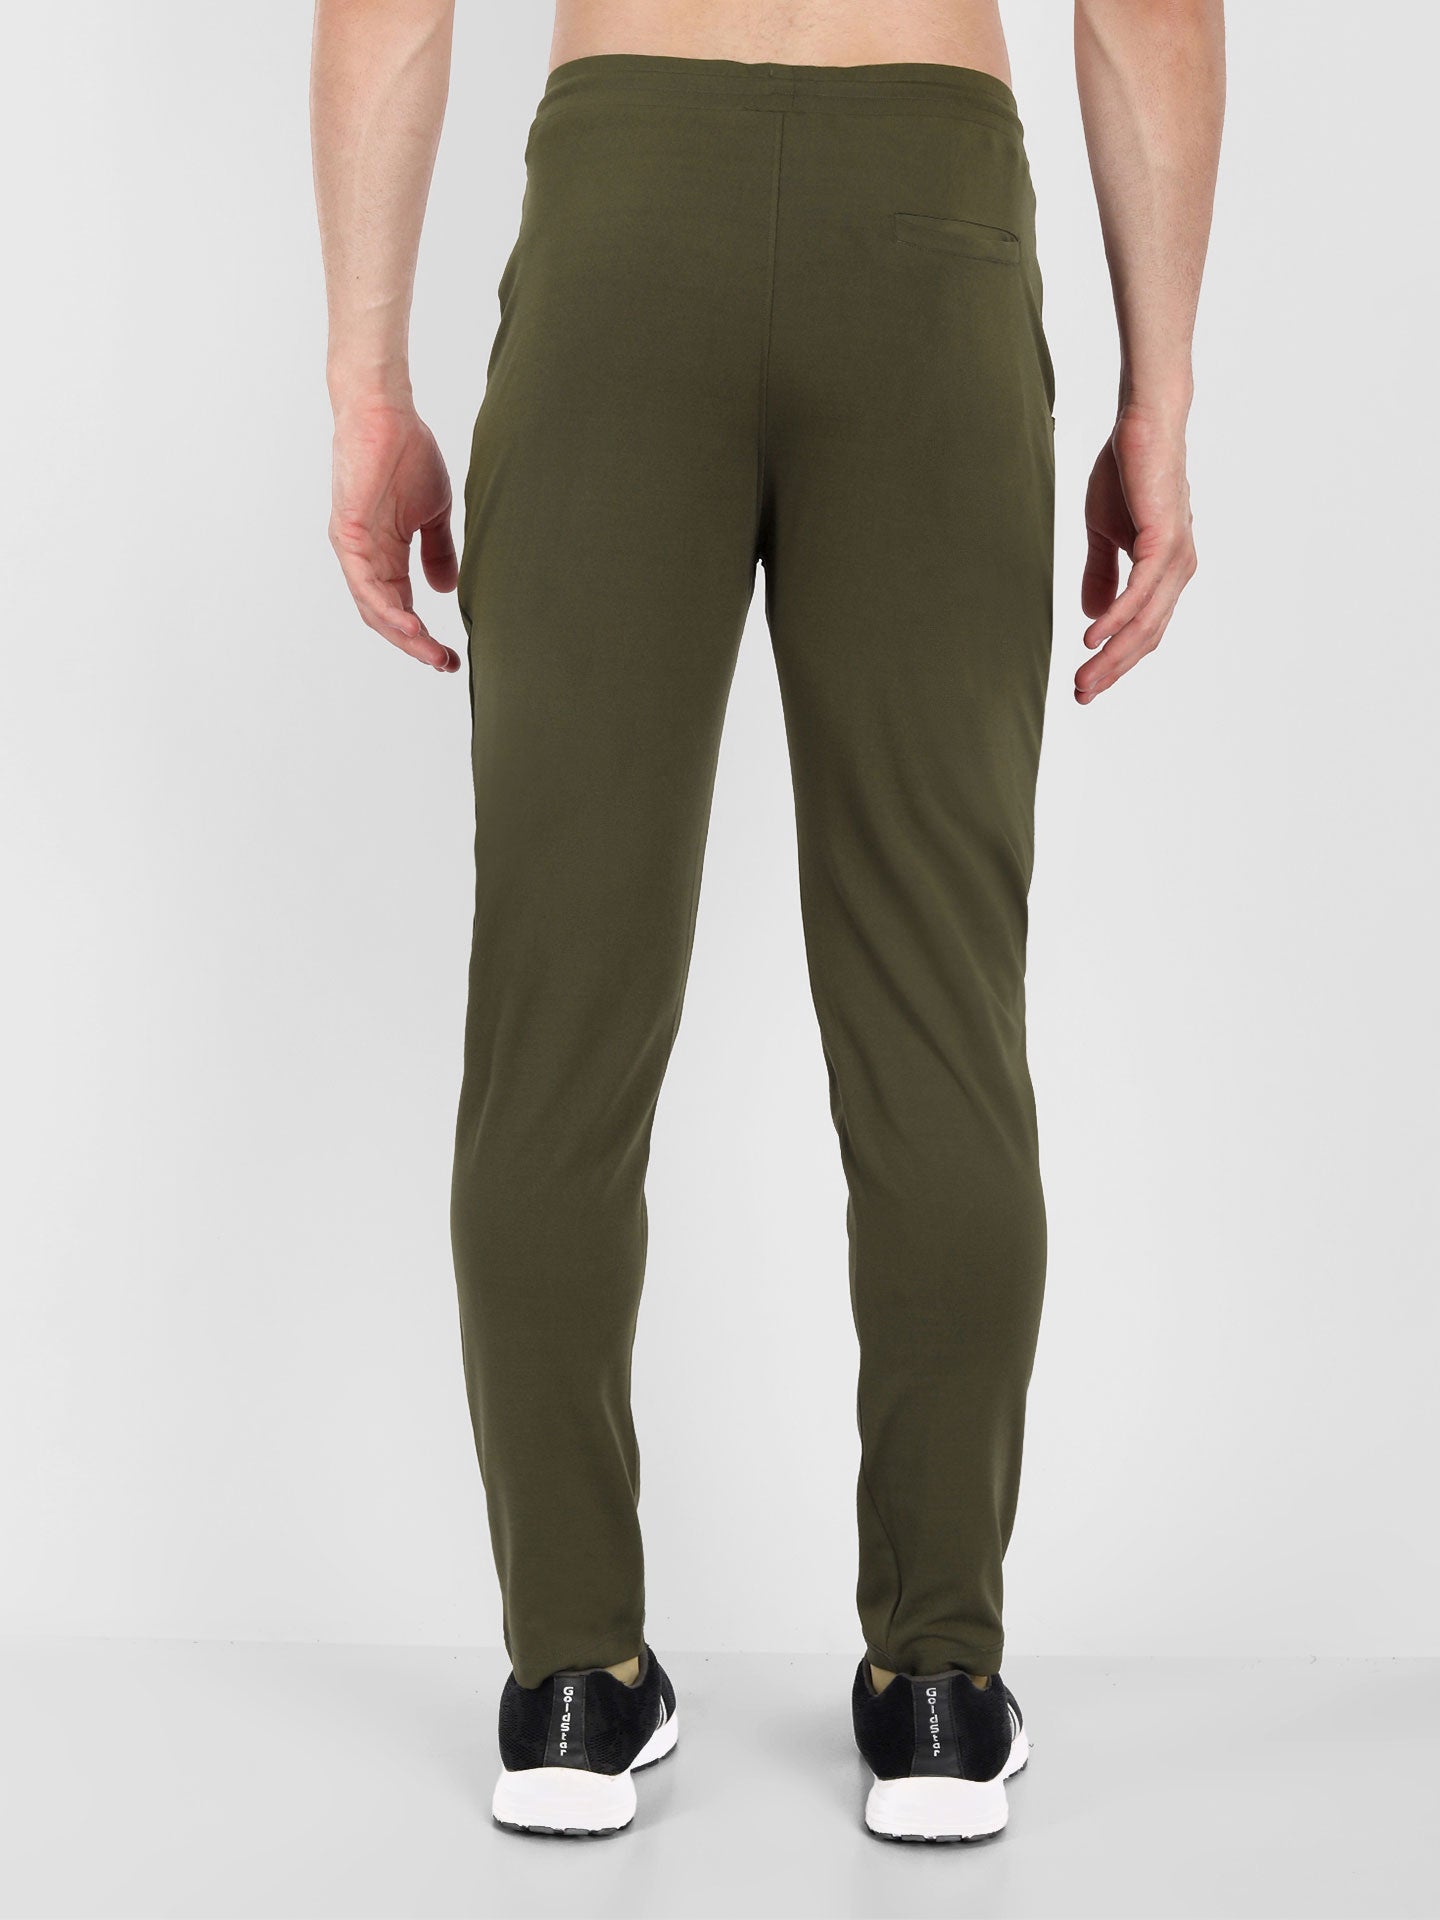 Ajile by Pantaloons Olive Green Slim Fit Printed Joggers